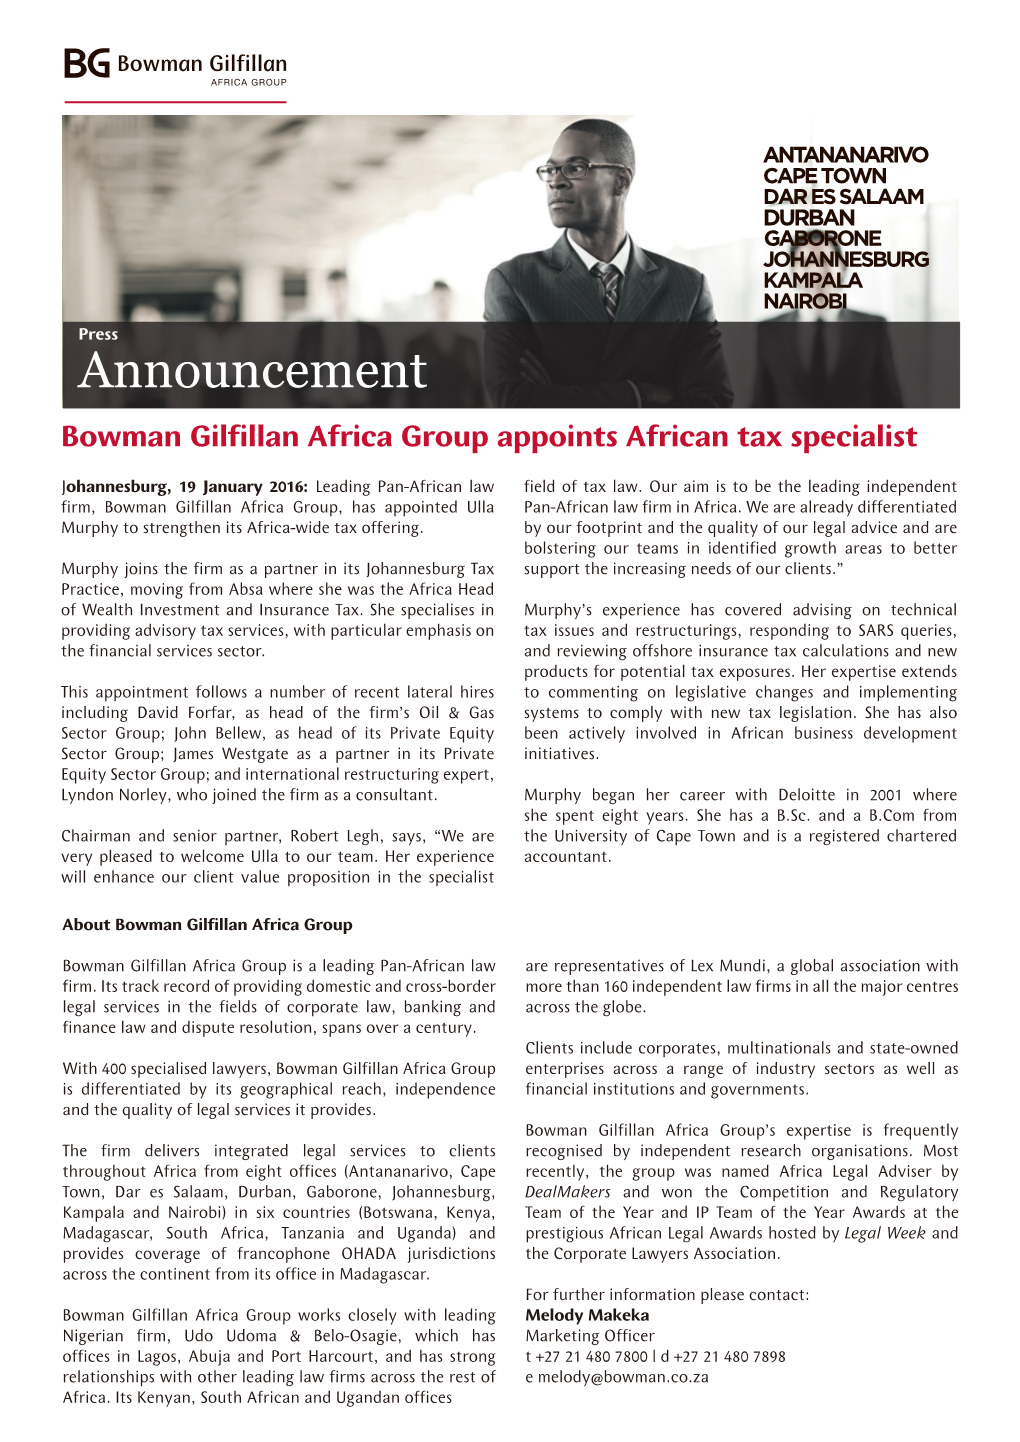 Announcement Bowman Gilfillan Africa Group Appoints African Tax Specialist